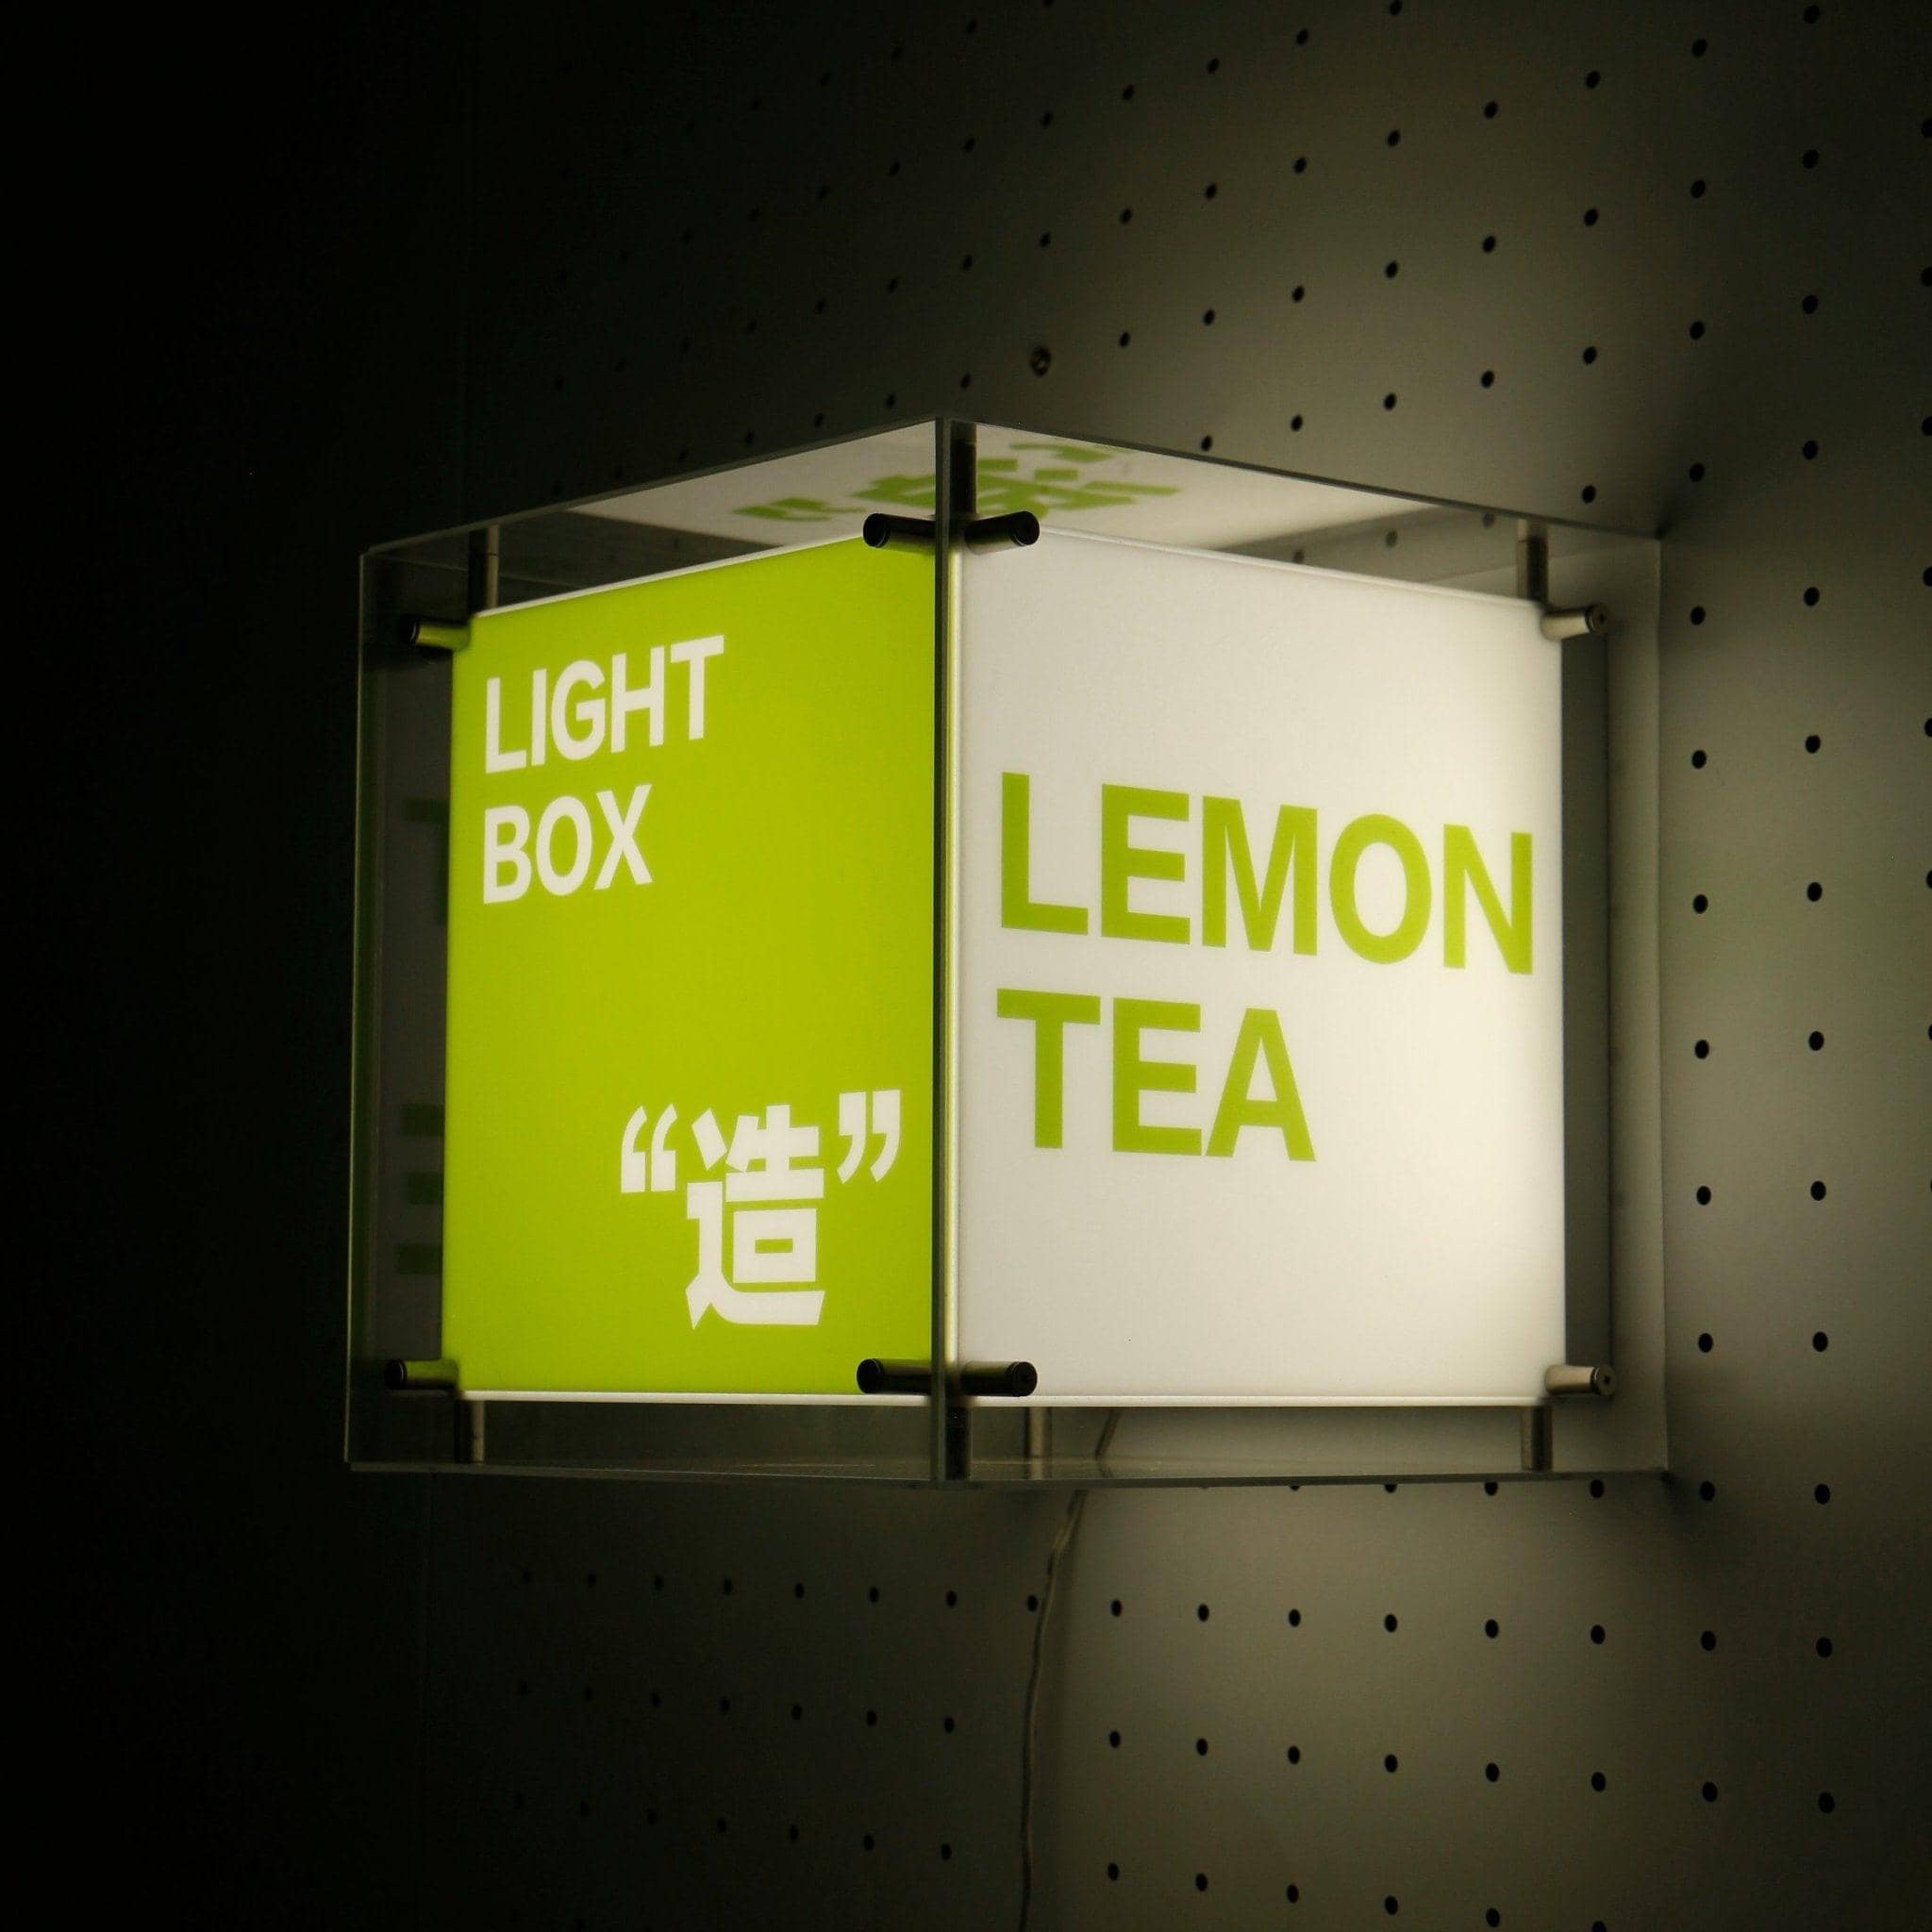 SwapSign lightbox RGBcolor - NeonsignLife